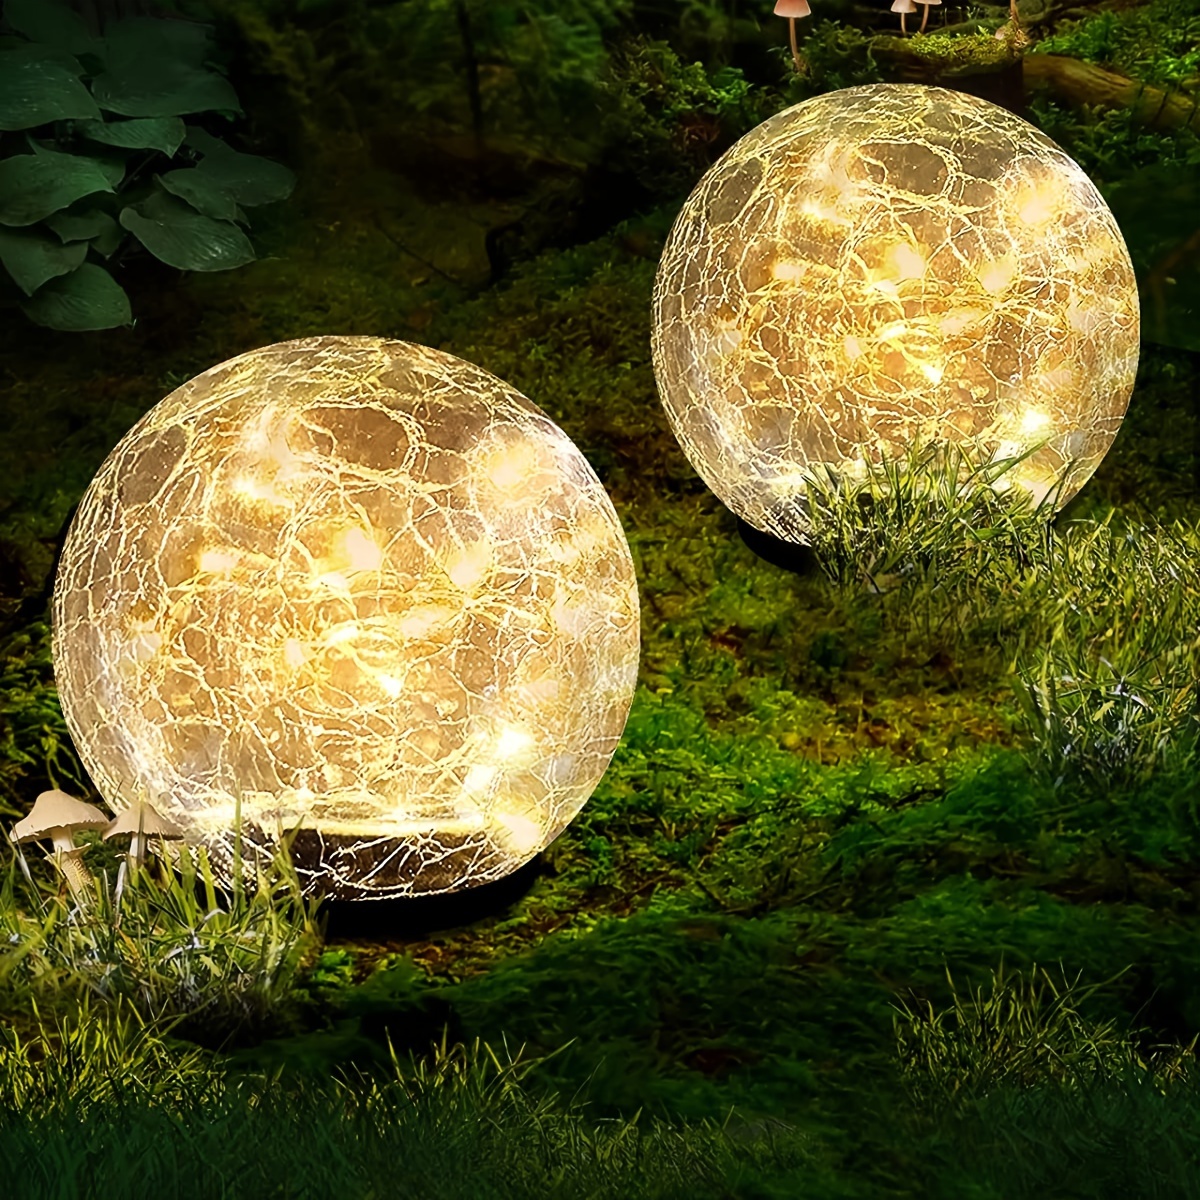 

1pc Garden Solar Light, Cracked Glass Globe Waterproof Led Outdoor Decorative Light For Patio, Lawn And Garden (with Ground Plug)